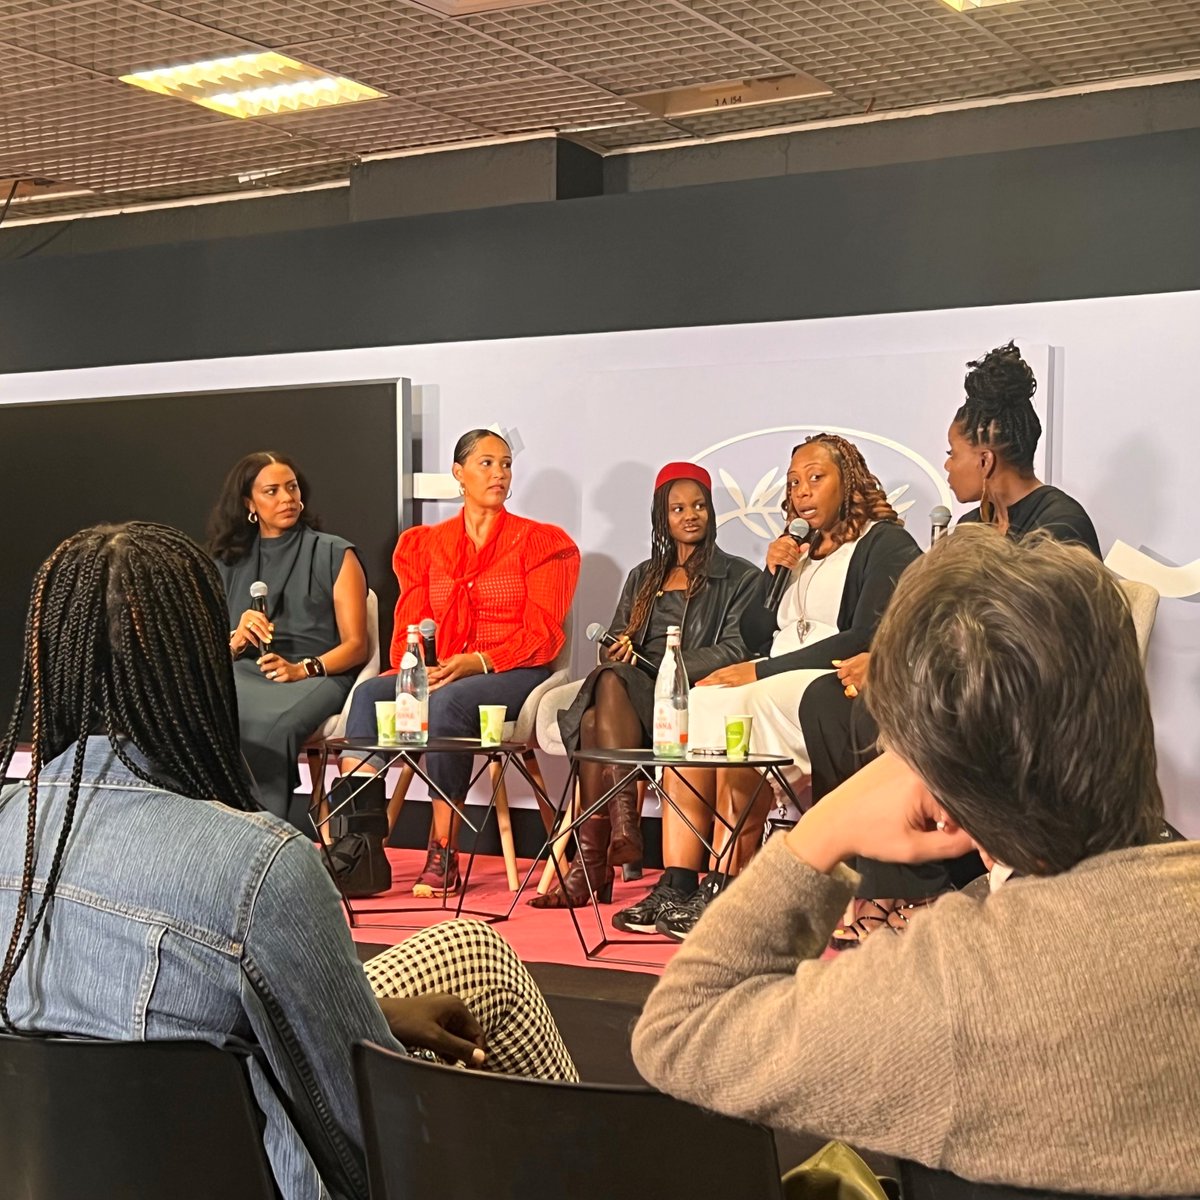 Black women filmmakers ask “Cannes you see us” on BFI and Diversity in Cannes panel

bit.ly/42icV3j

#cannesfilmfestival2023 #diversityincannes #diversityandinclusion #filmmaking #blackwomenfilmmakers